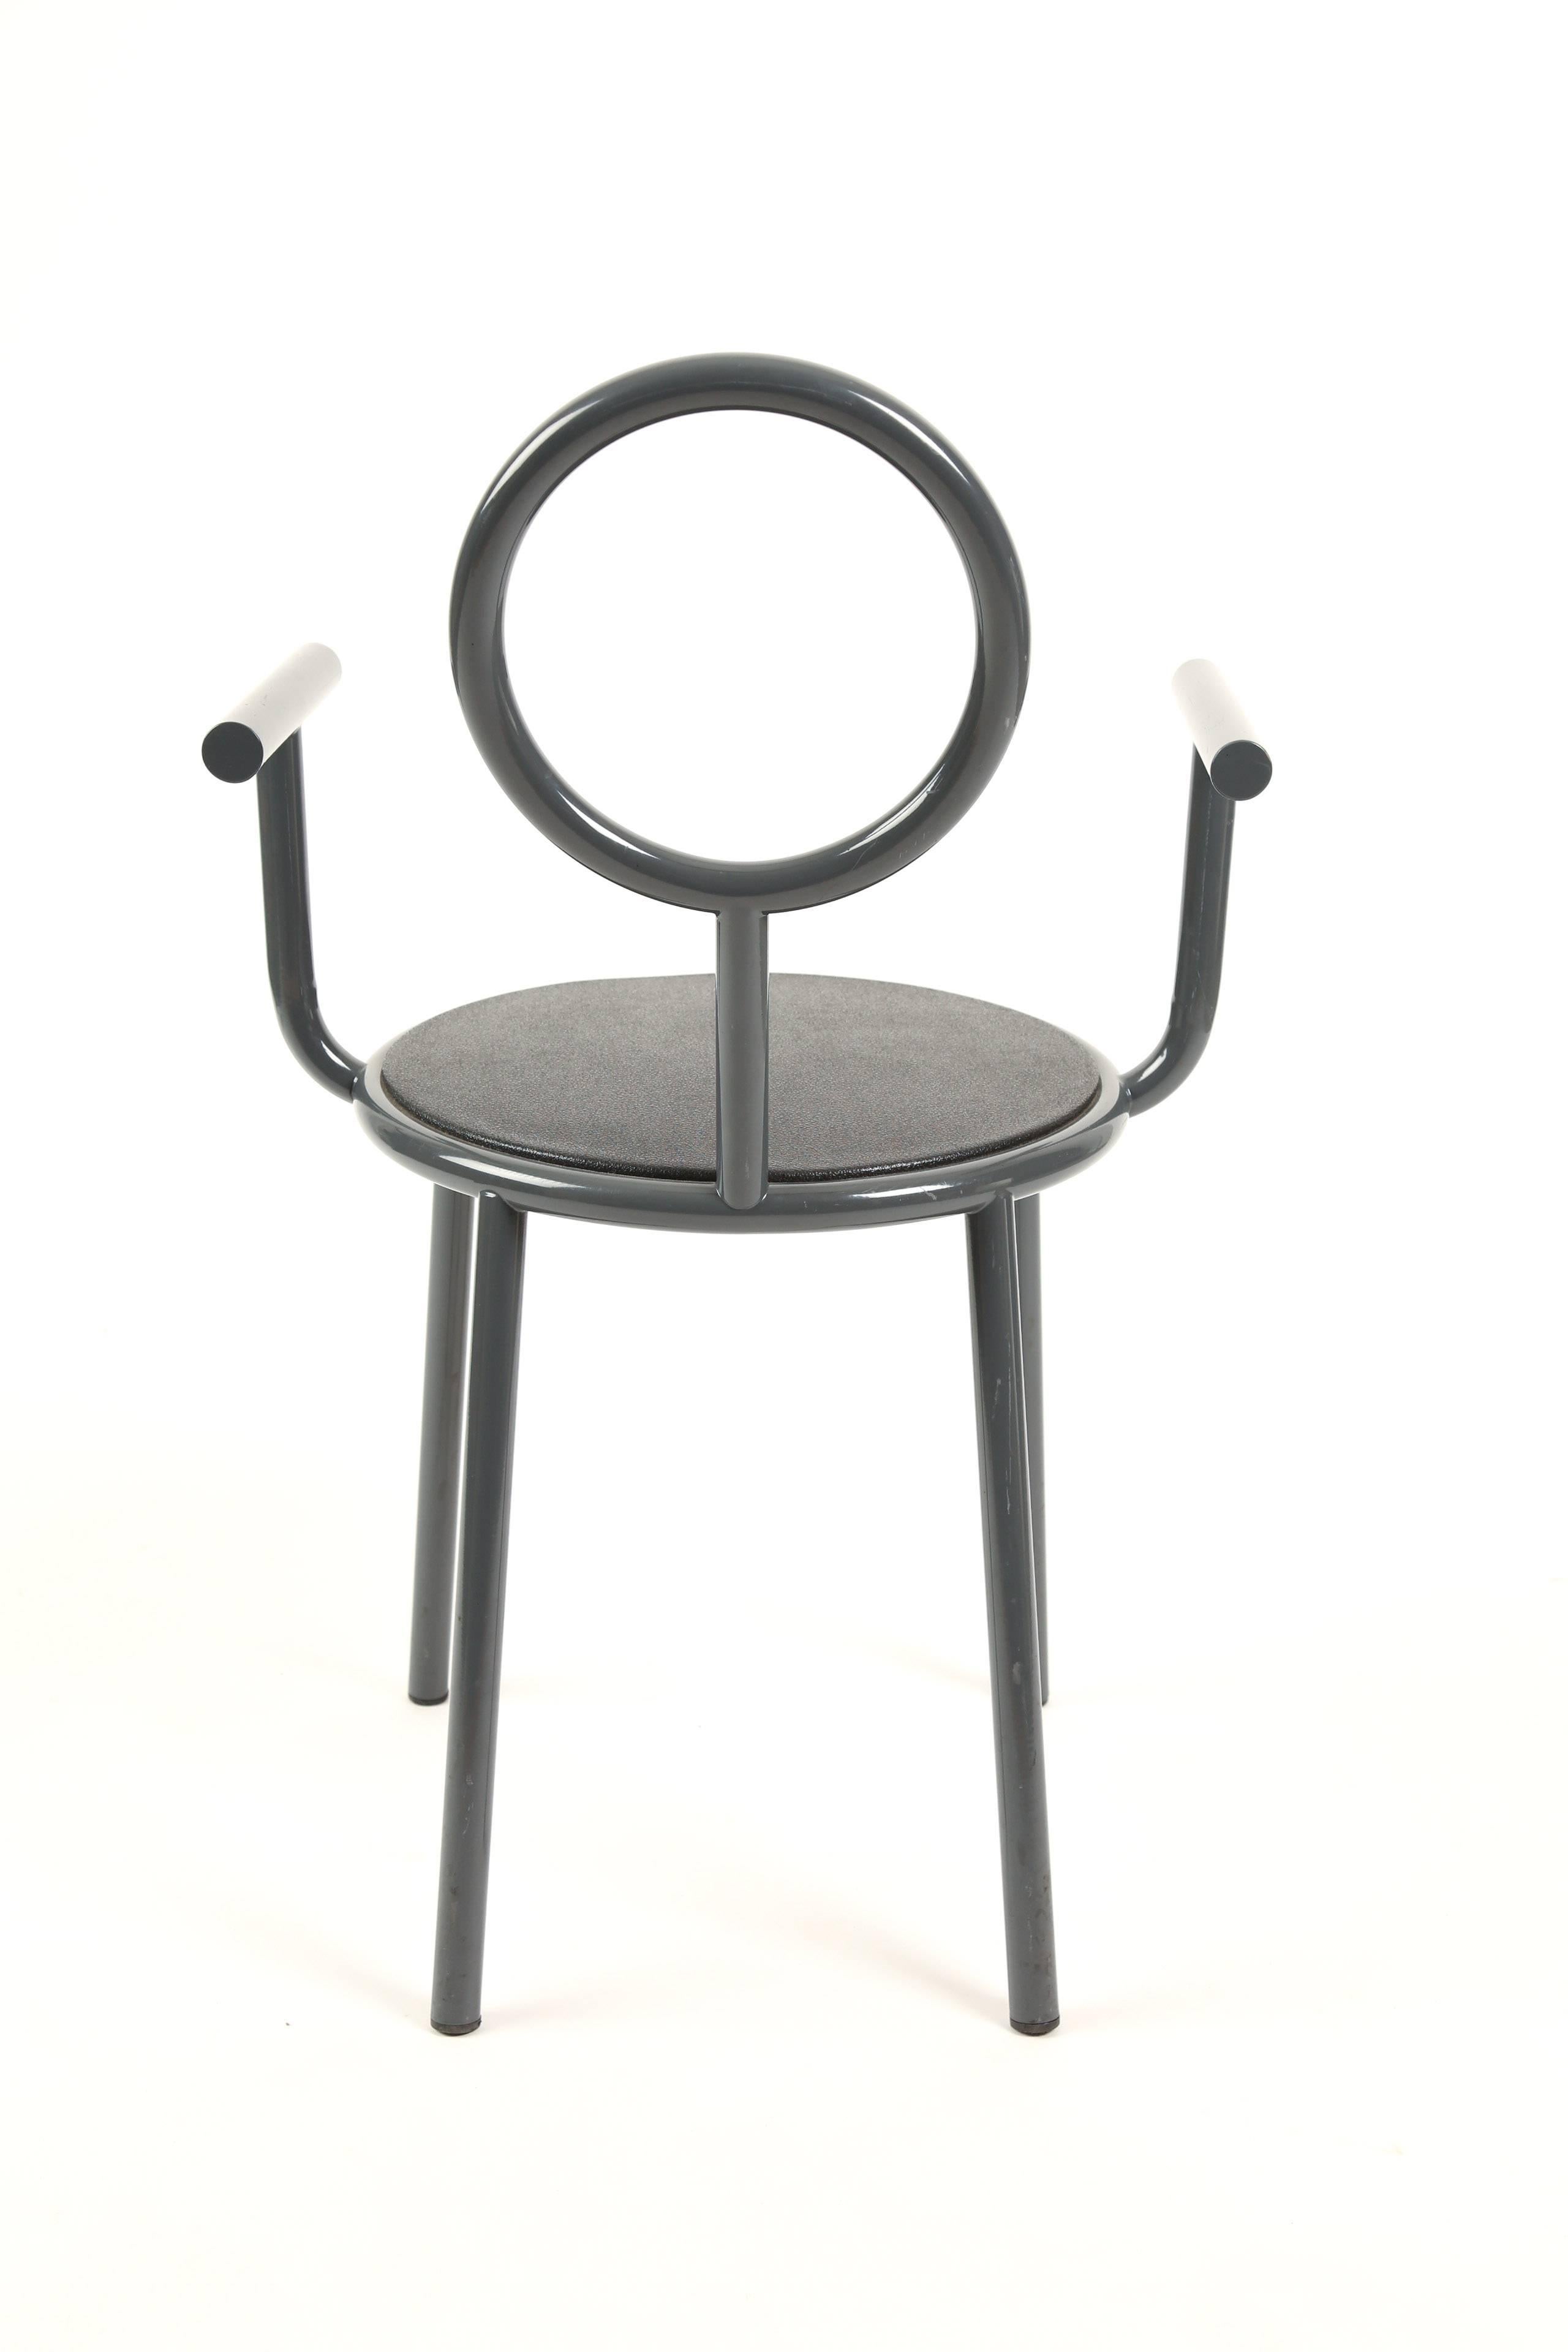 STELLINE MEMPHIS CHAIR . One Memphis chair Stelline. Happy form, designed by Alessandro Mendini. Simple and sharp design. Dark grey steel.